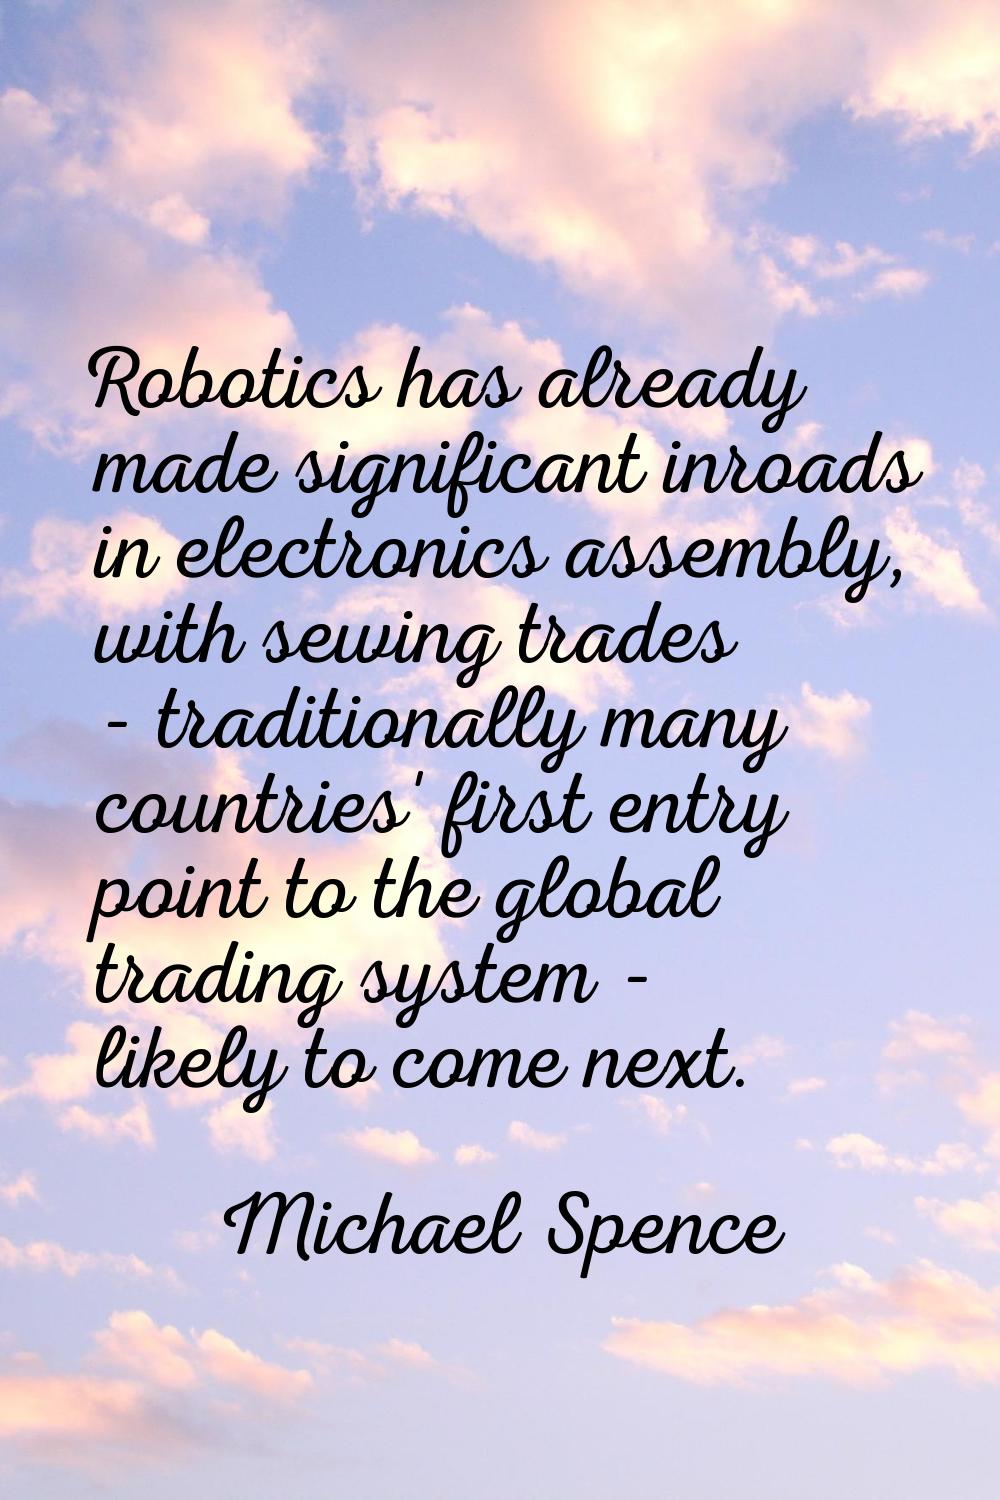 Robotics has already made significant inroads in electronics assembly, with sewing trades - traditi